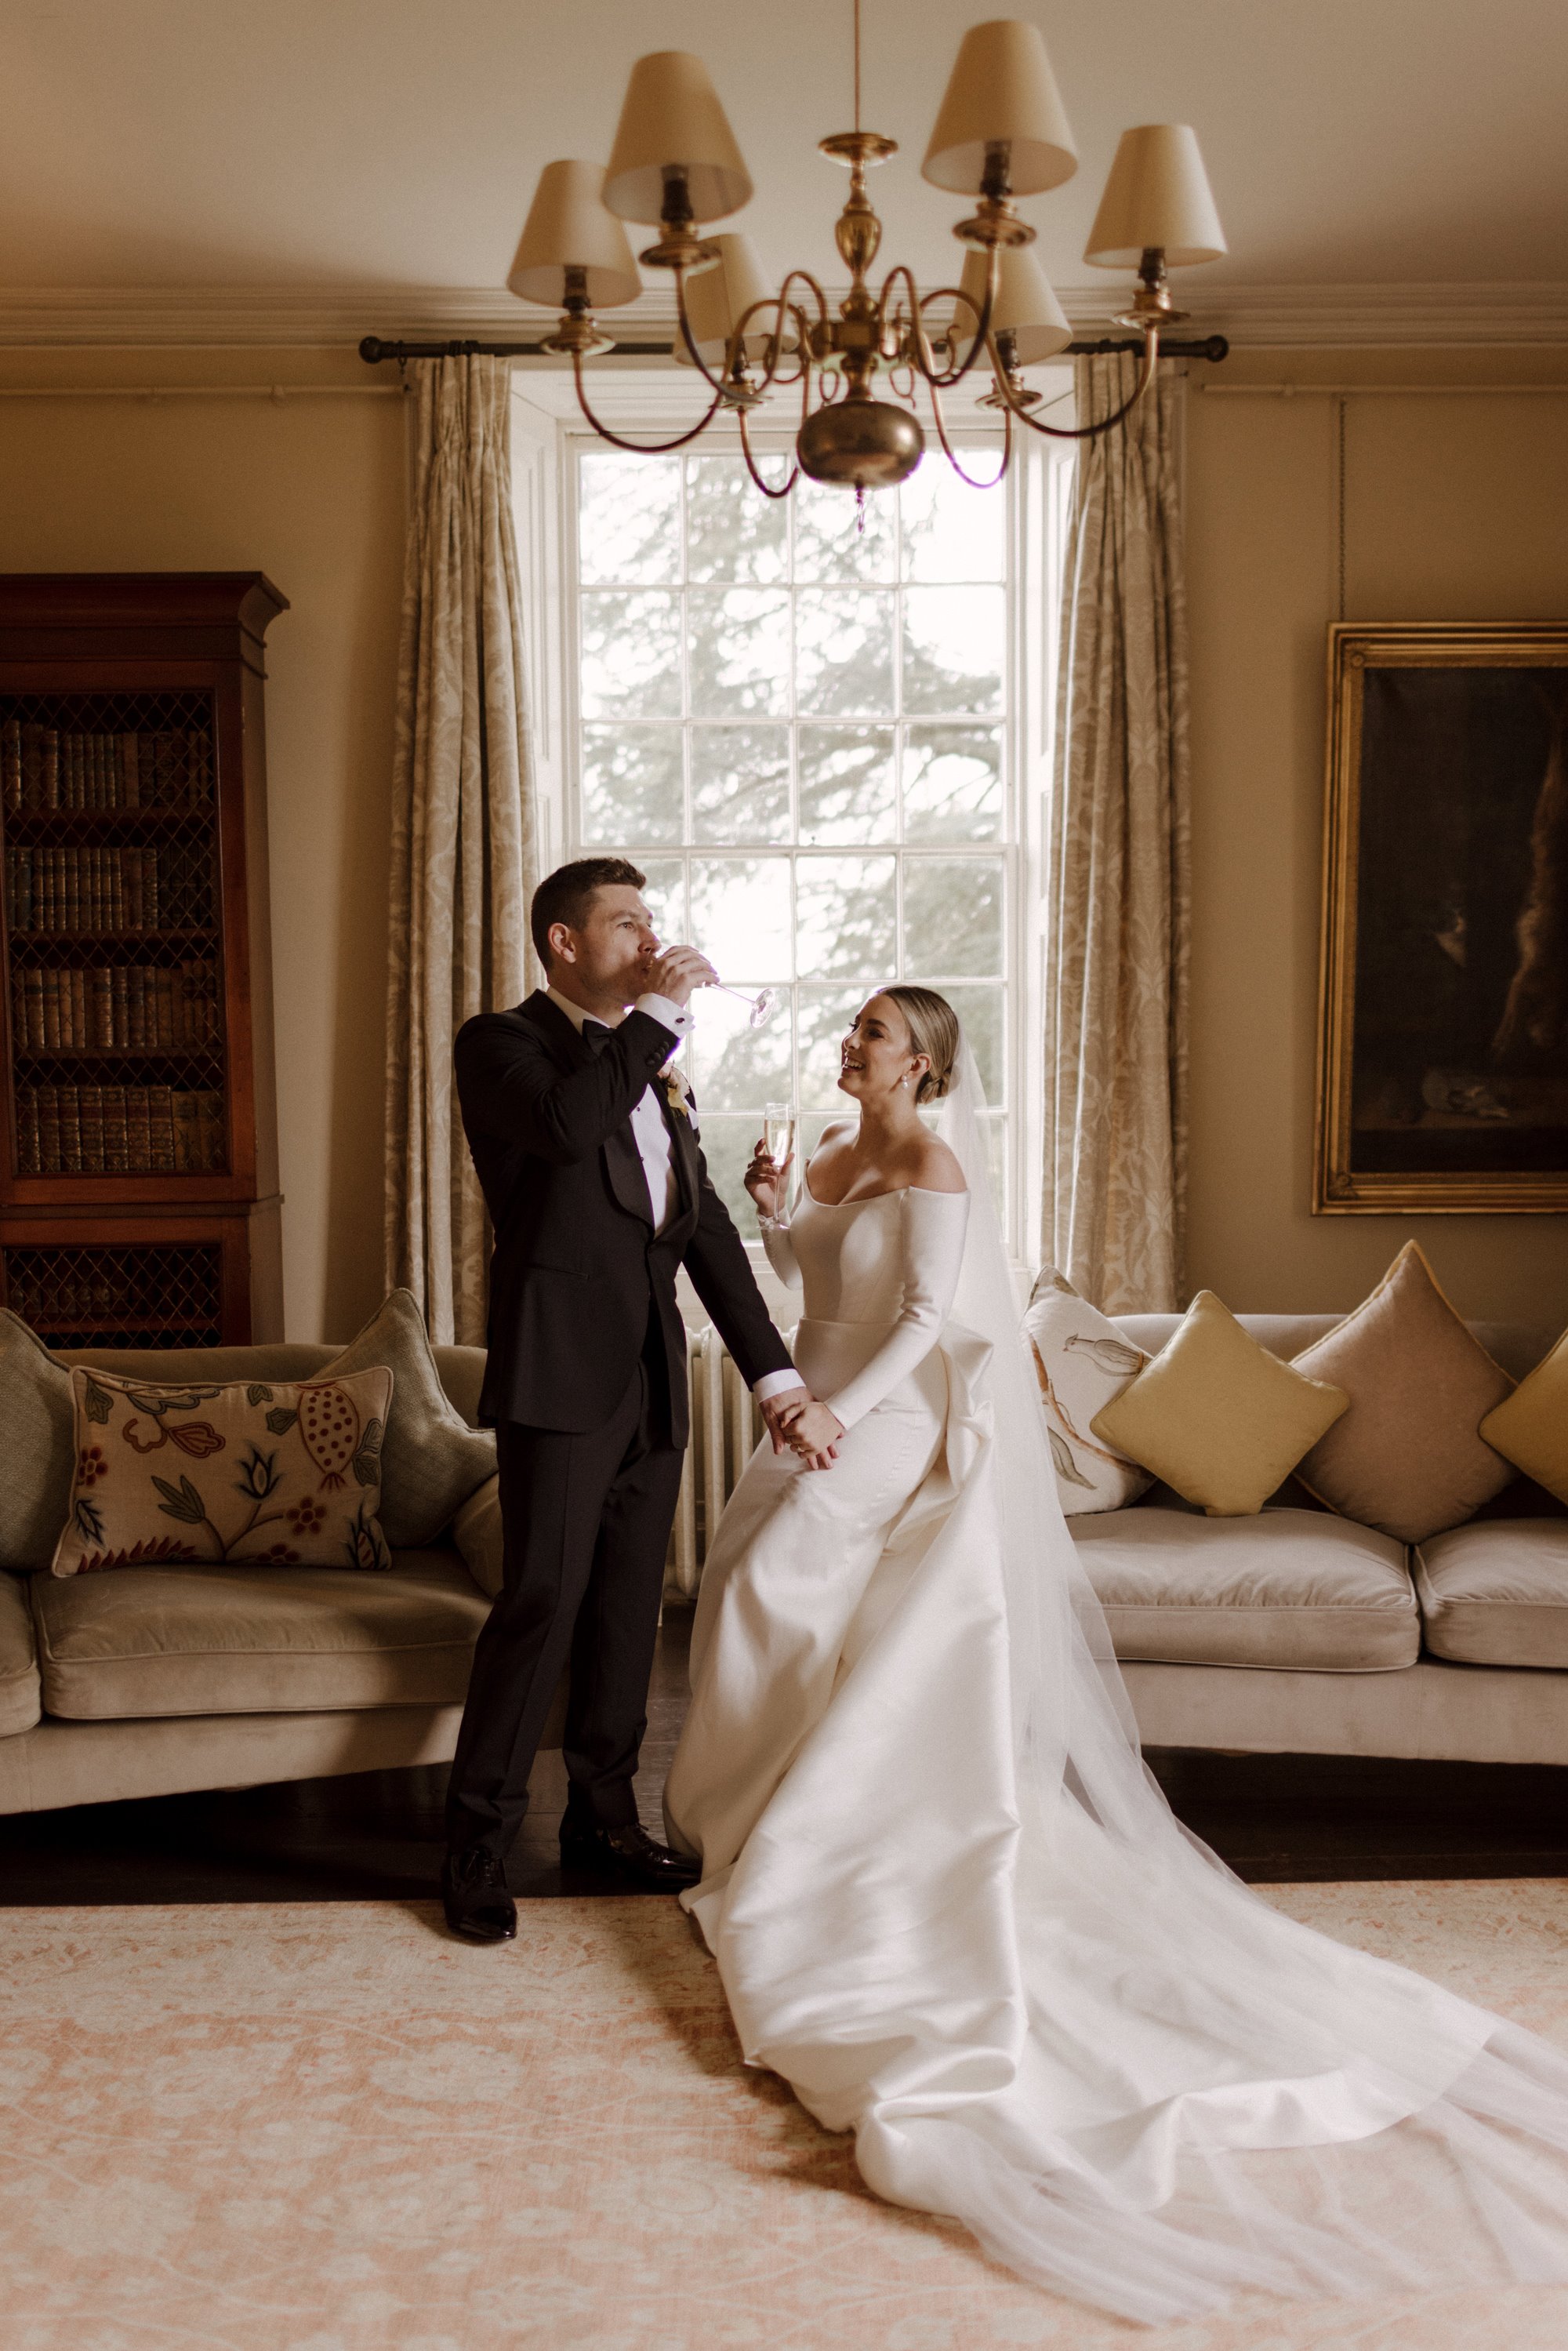 Bride and groom enjoying a glass of bubbles in an elegant room of a stately home in the Cotswolds